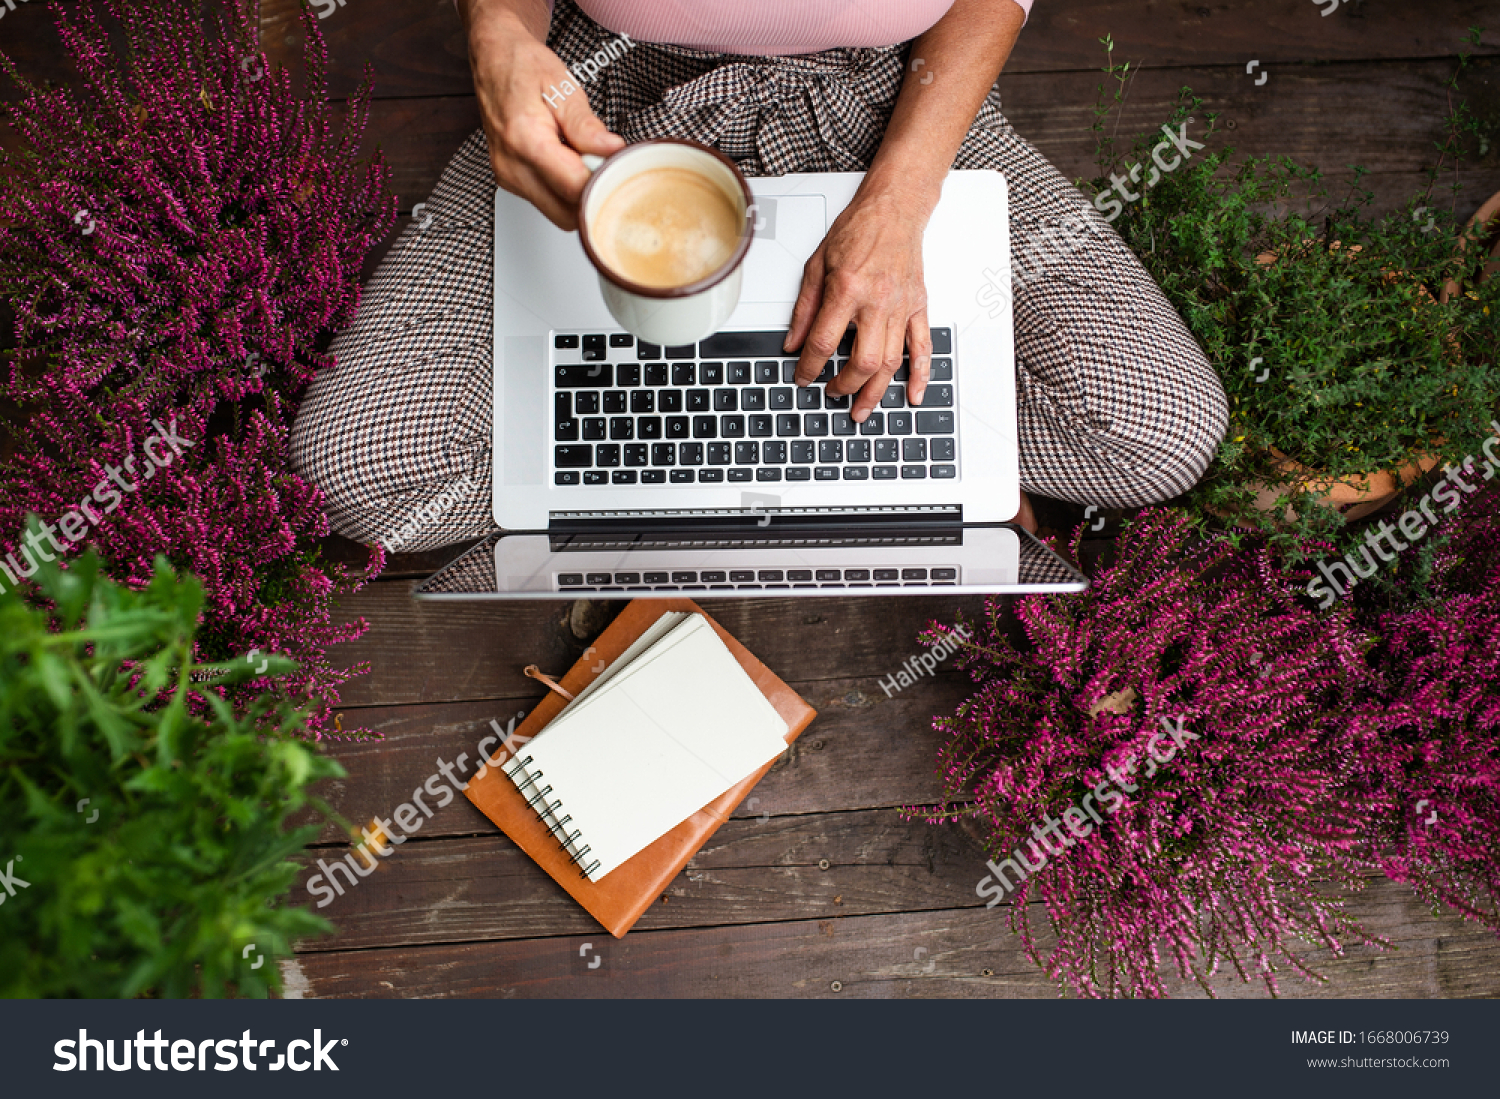 Top view of senior woman with laptop sitting outdoors on terrace, working. #1668006739